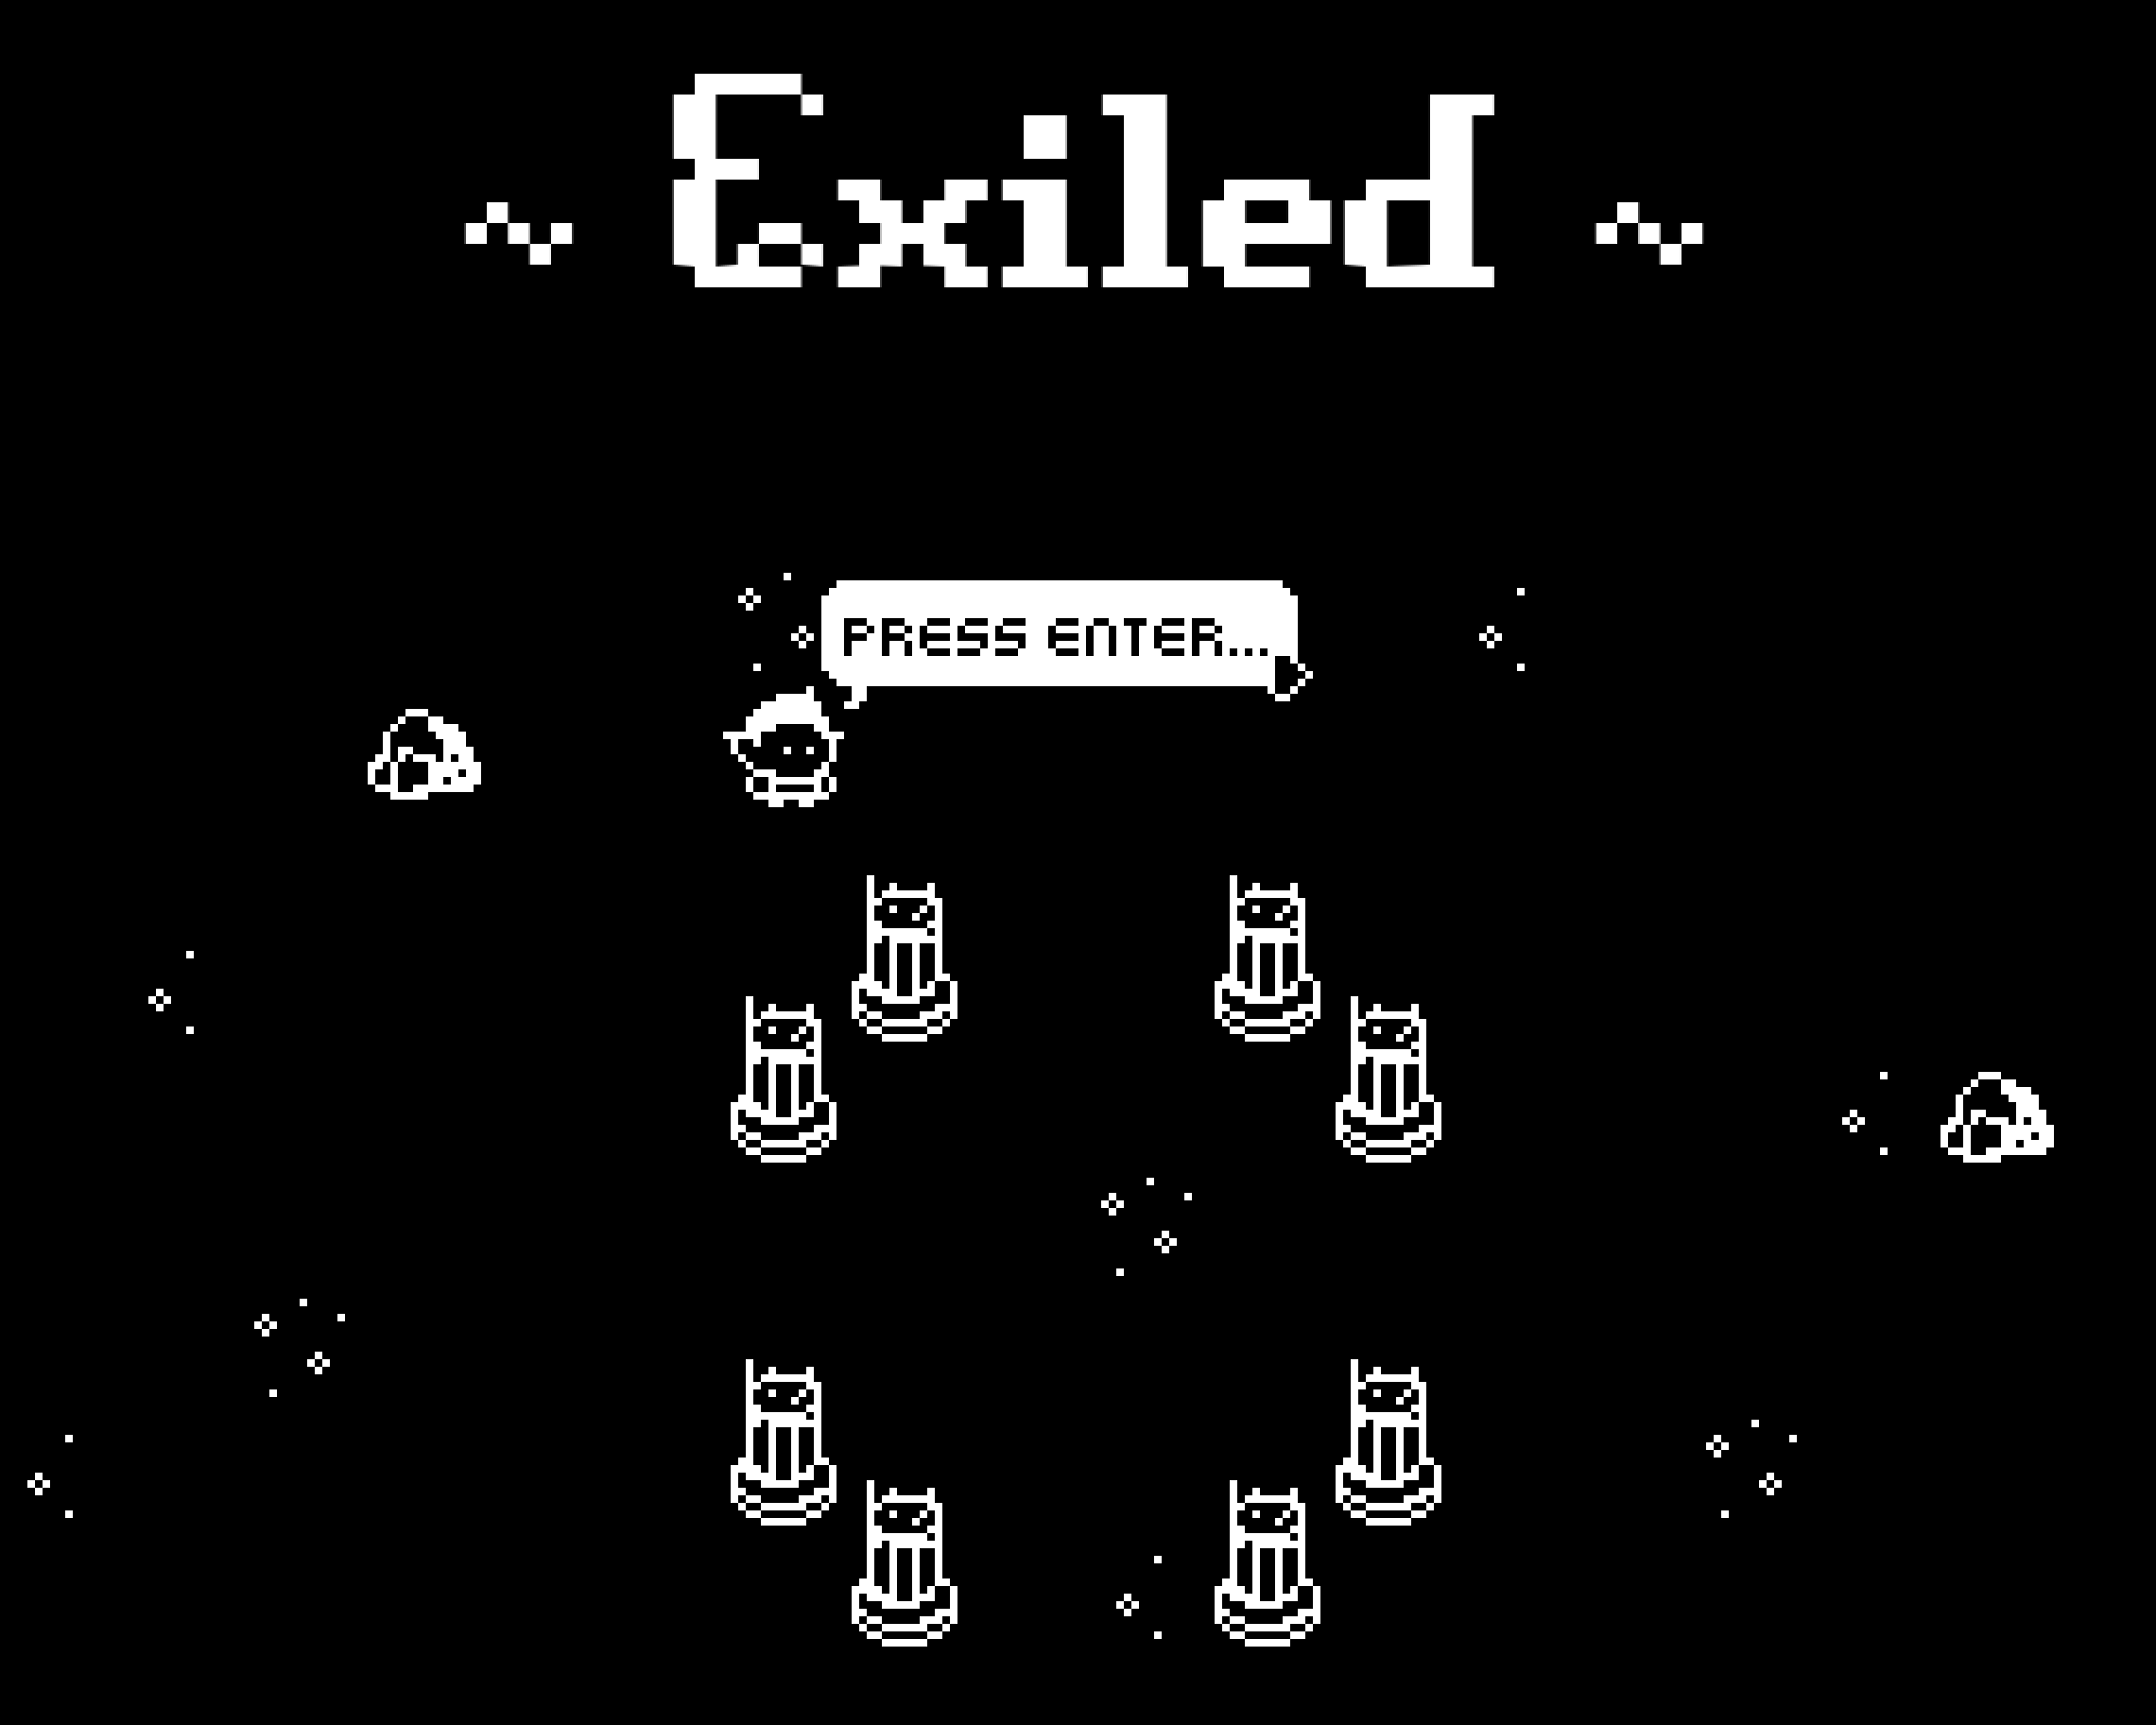 Title screen of "Exiled"